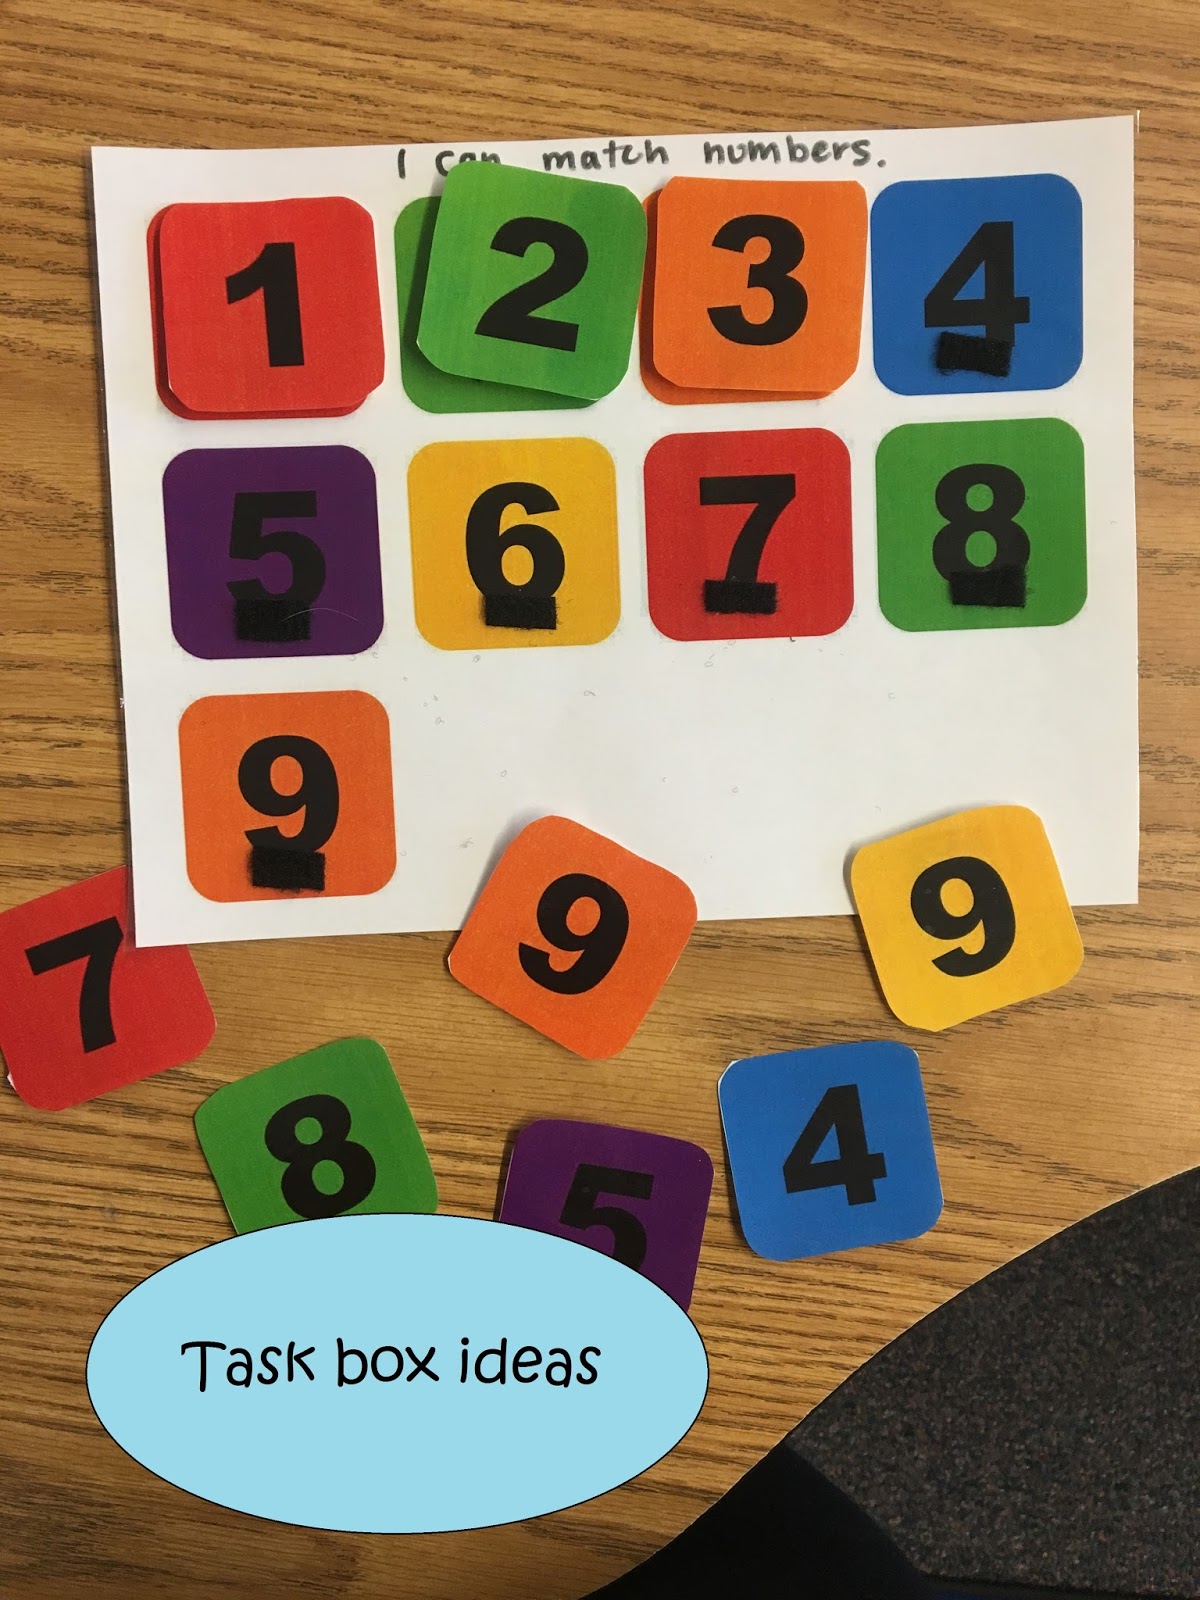 Little Miss Kim's Class: Quick and easy task box ideas for special education